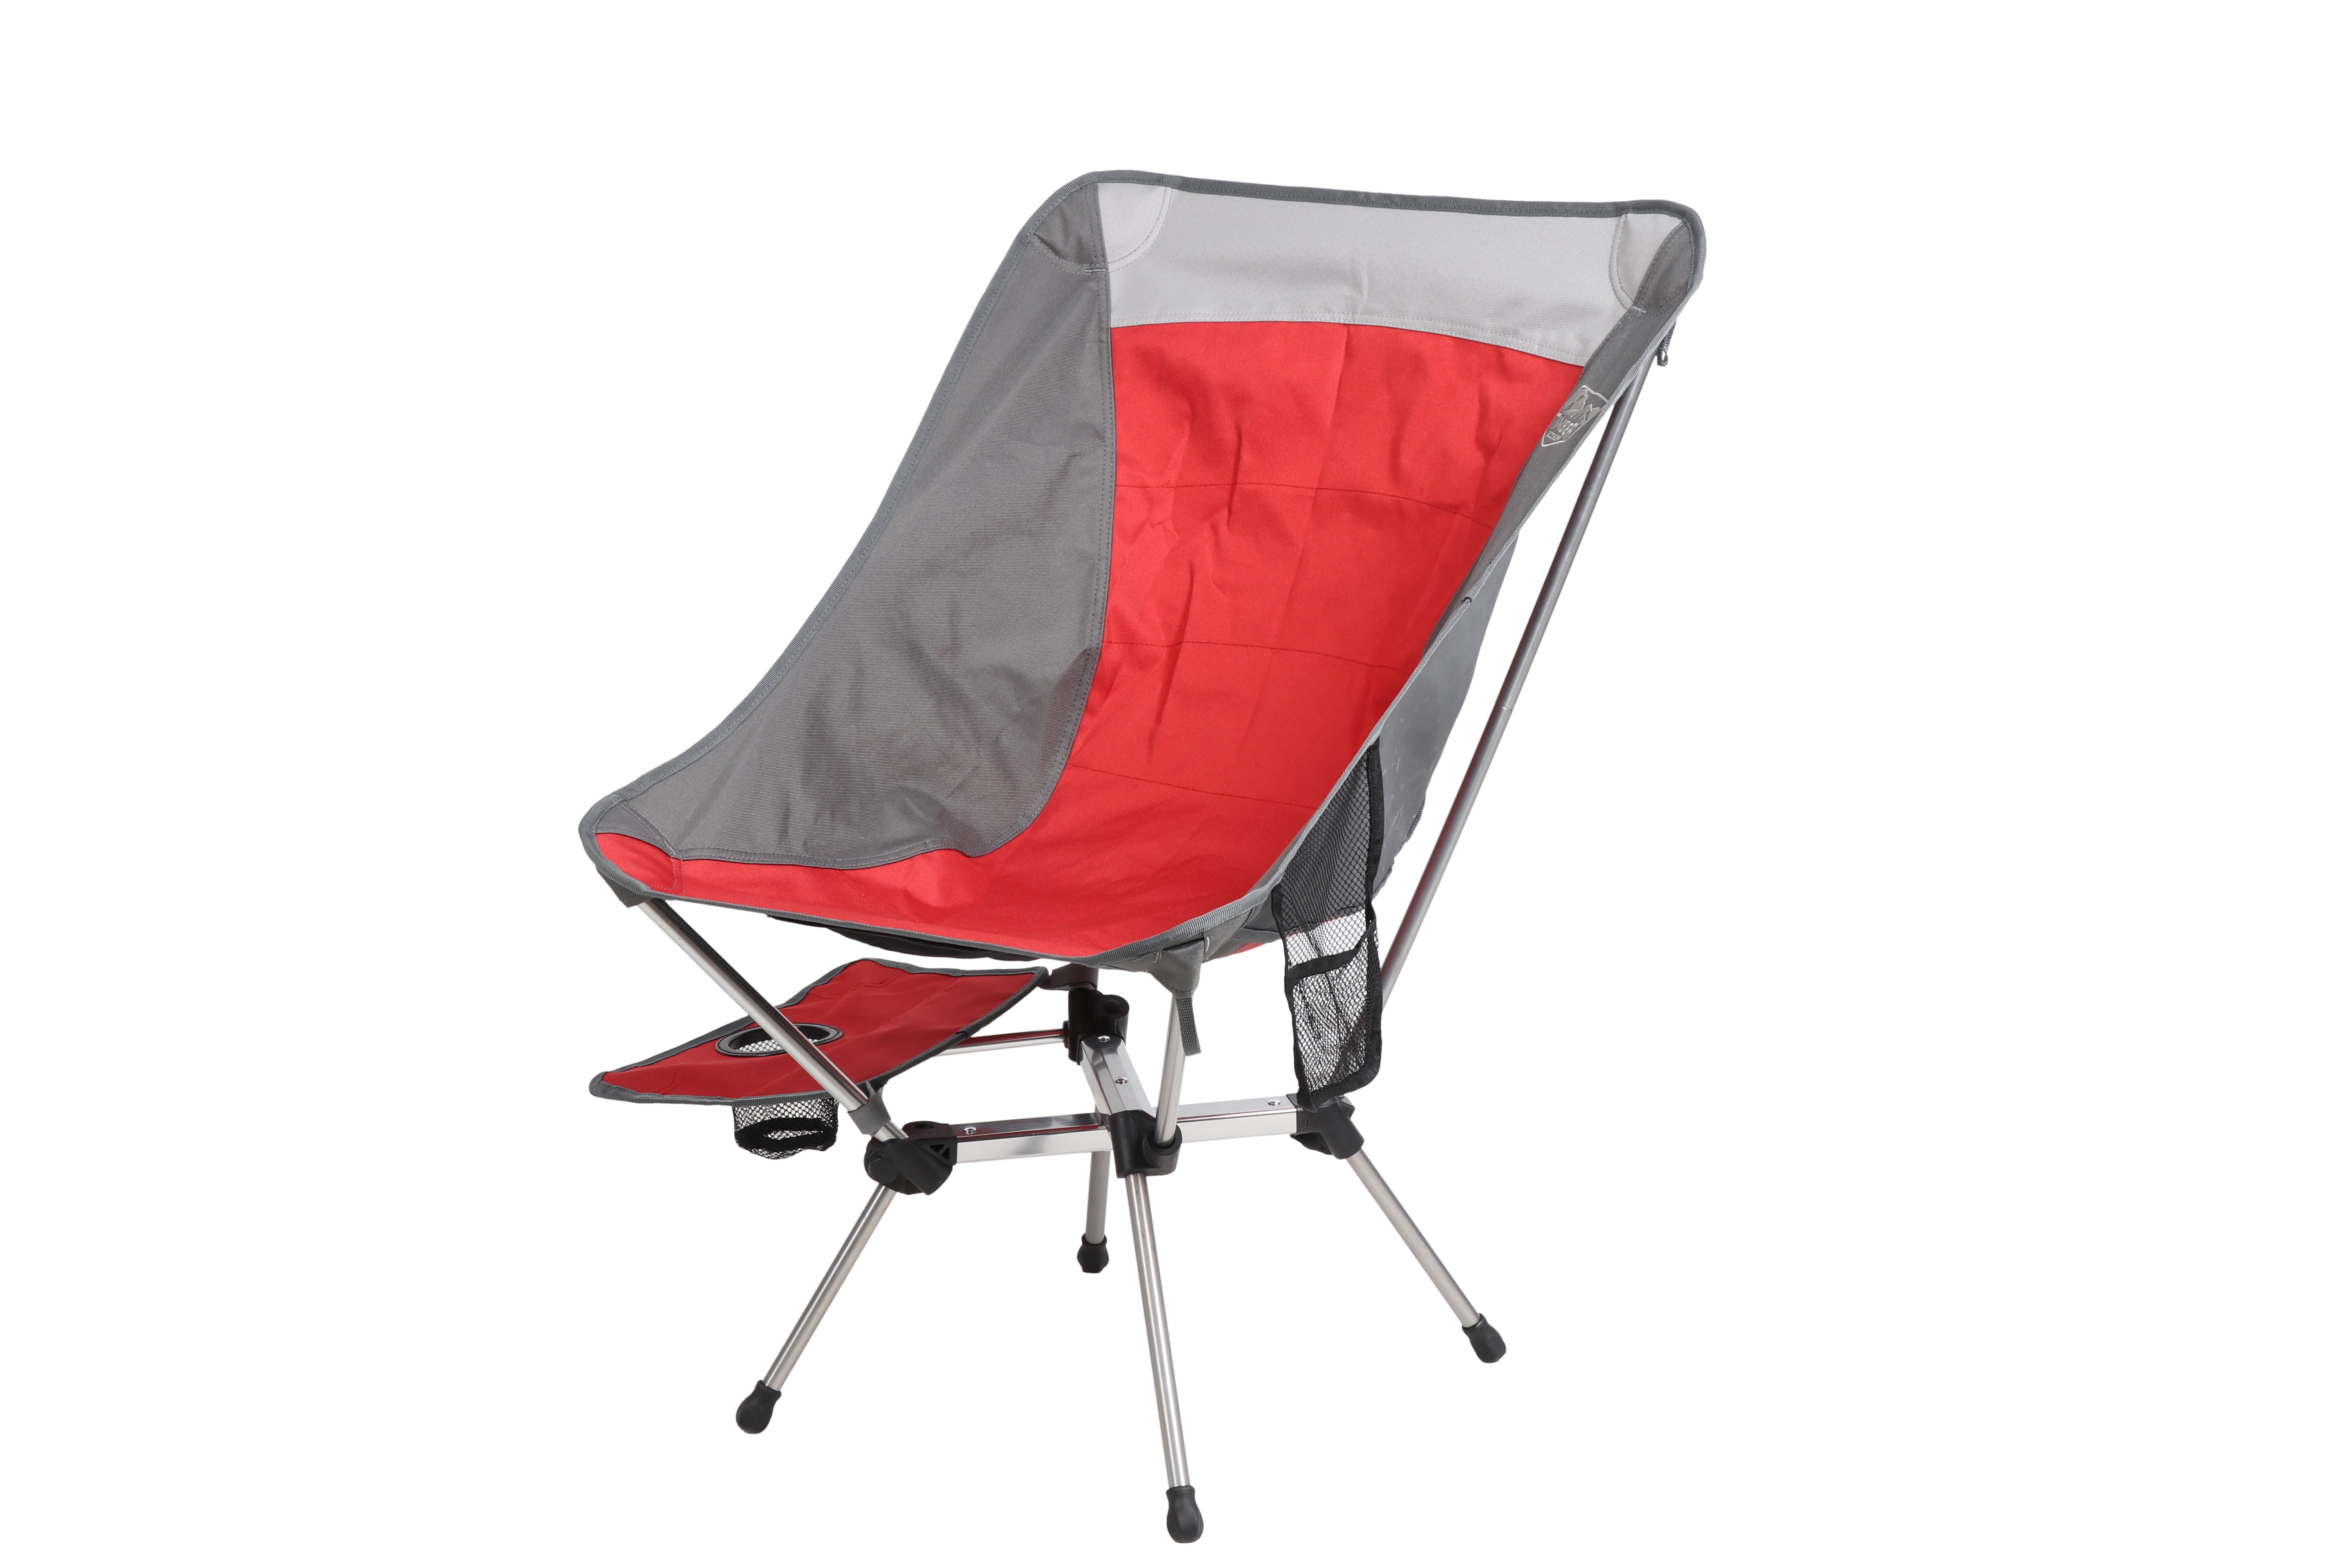 Accuser Parasite Take a risk Timber Ridge Yew x-Frame Backpack Camping Chair, Red and Gray, Adult -  Walmart.com